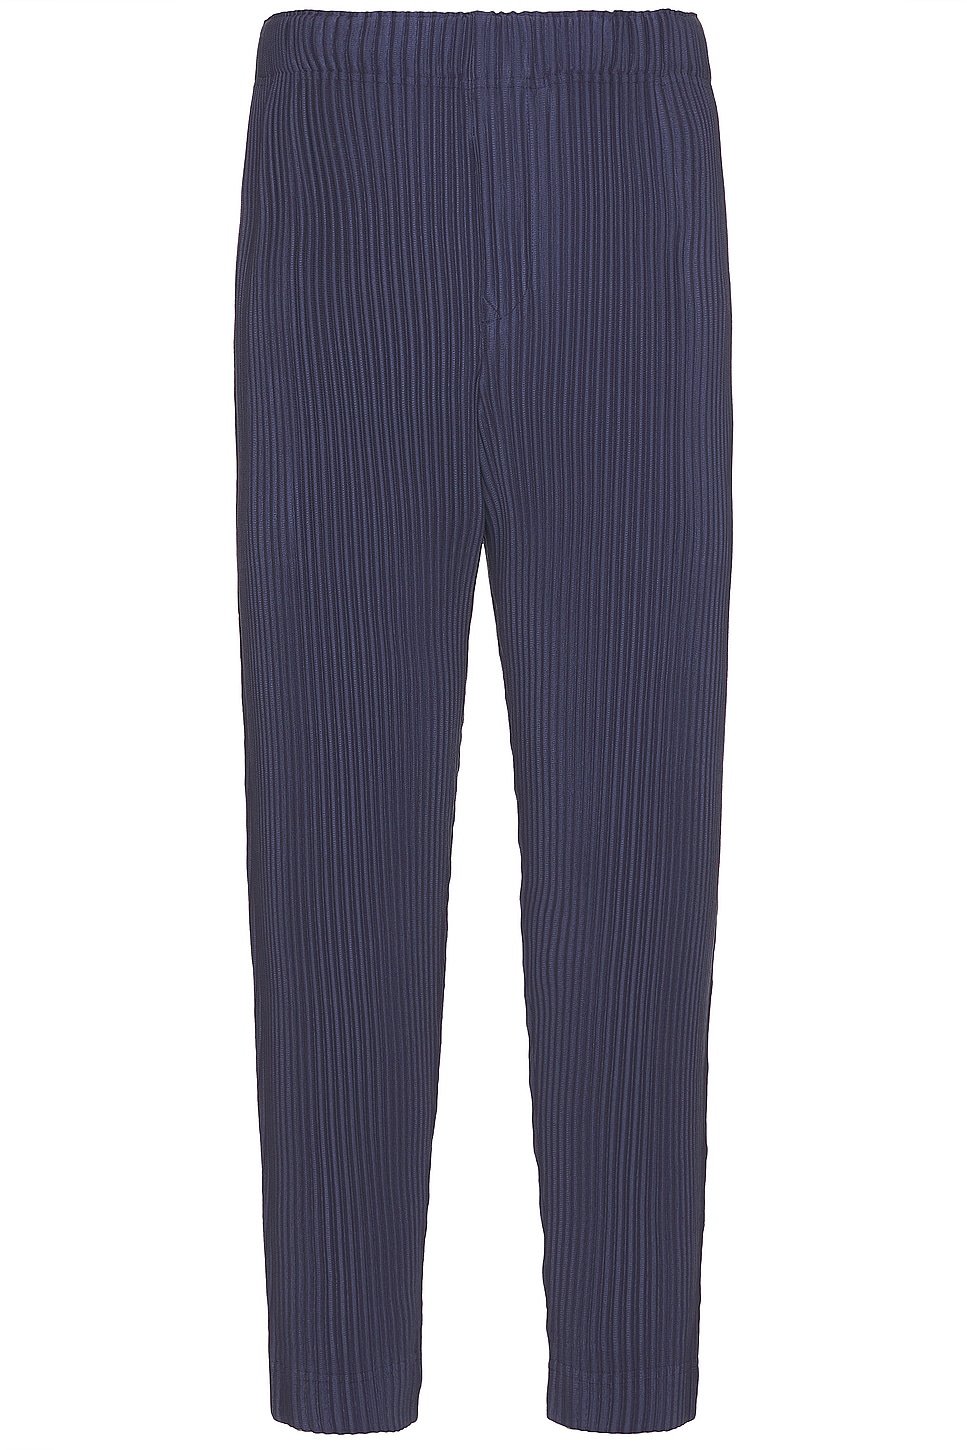 Image 1 of Homme Plisse Issey Miyake Pleated Pants in Blue Charcoal